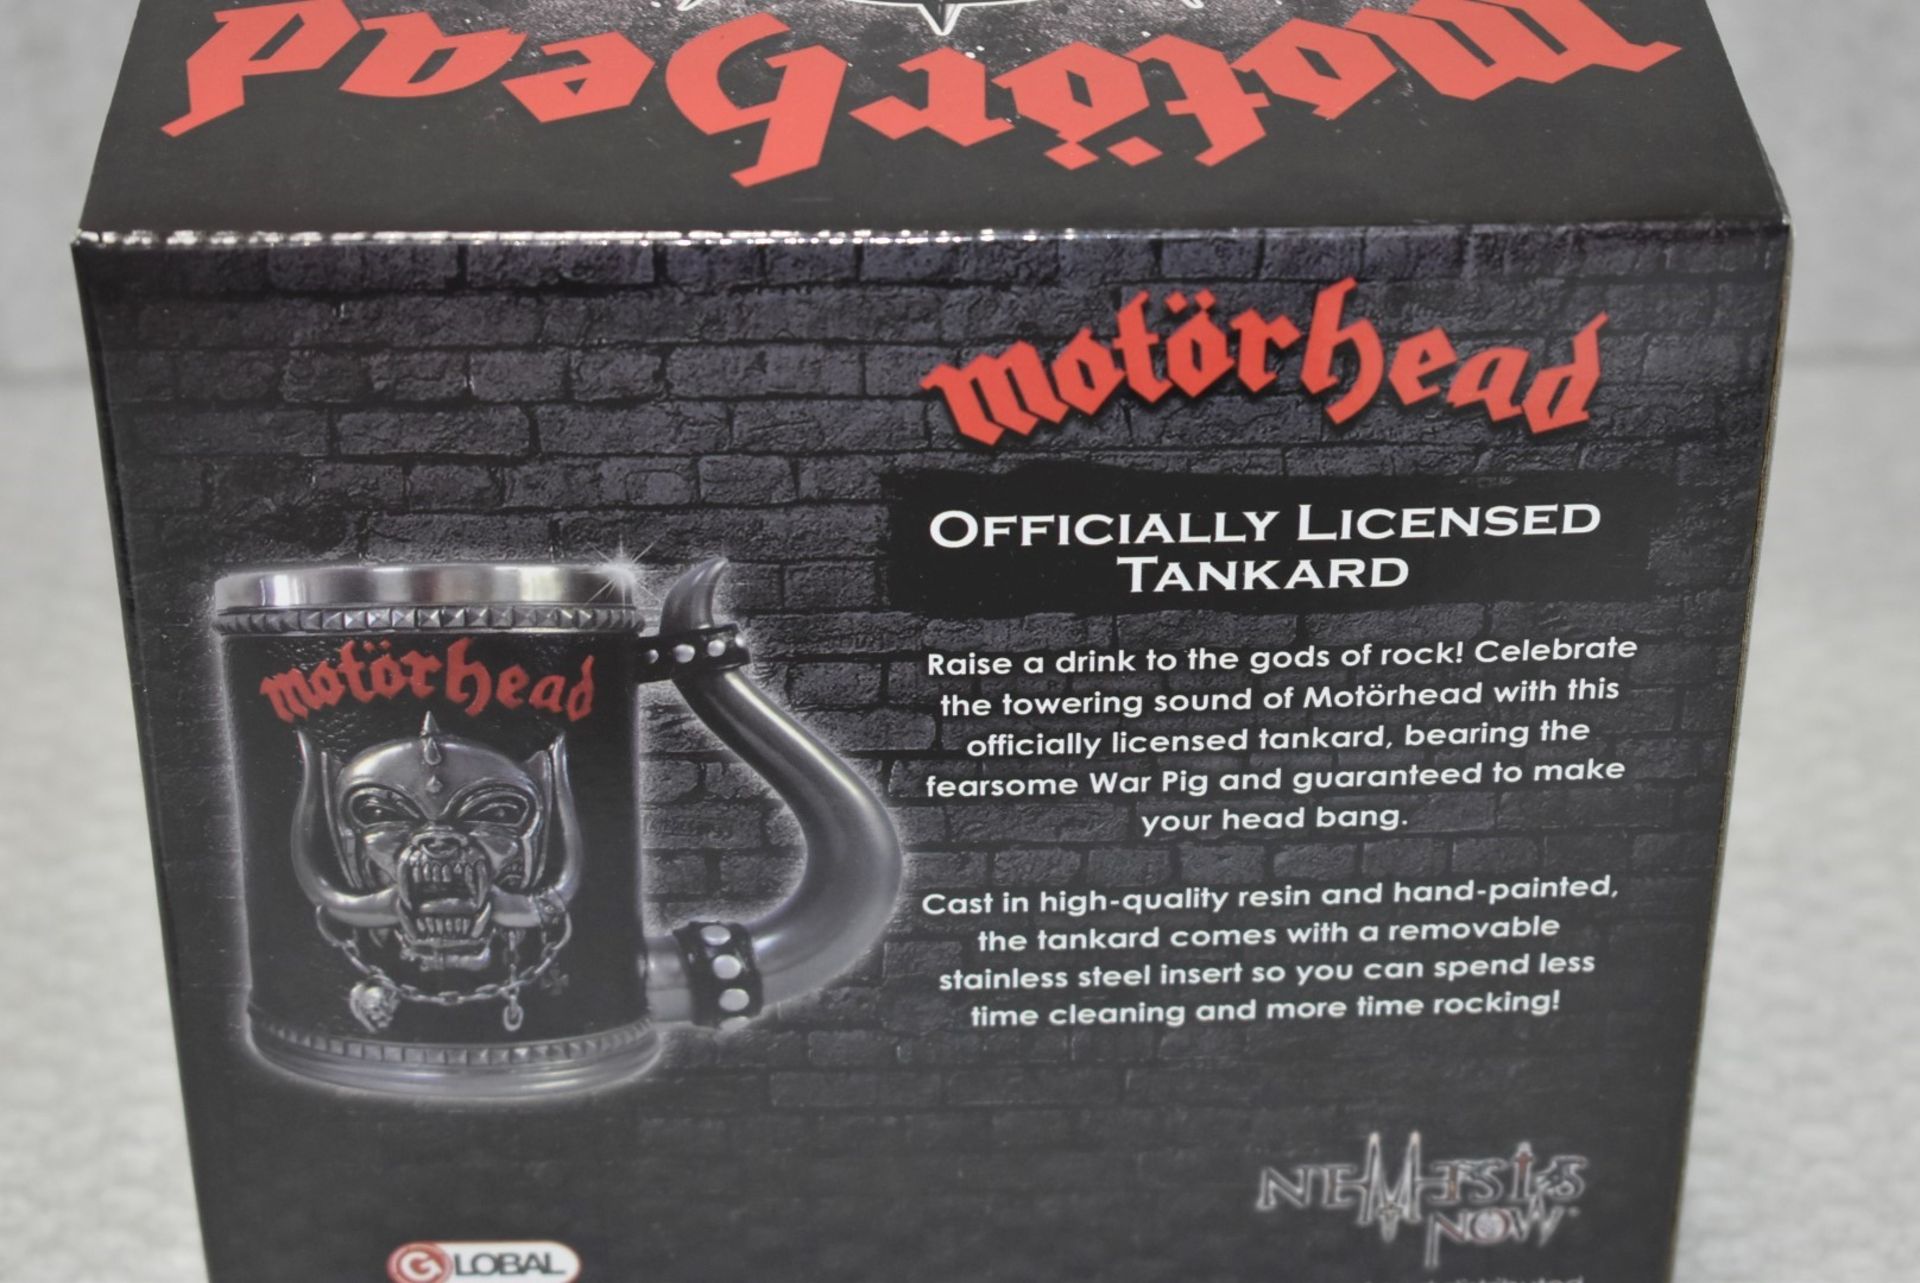 1 x Motorhead Drinks Tanker By Nemesis Now - Features Detailed Warpig Sculpture, Hand Painted - Image 5 of 11